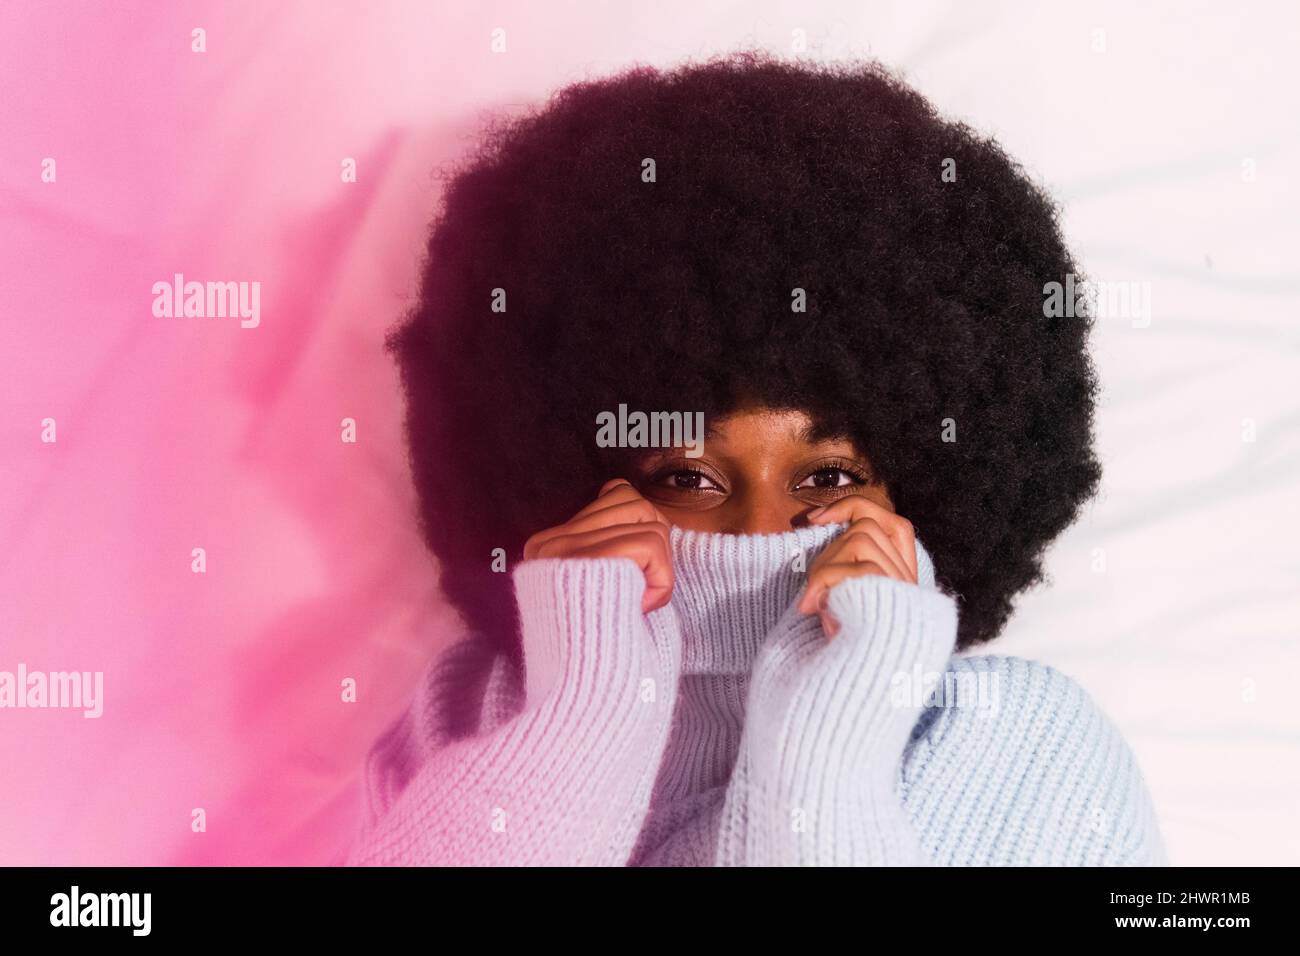 Afro young woman covering face with turtleneck sweater Stock Photo